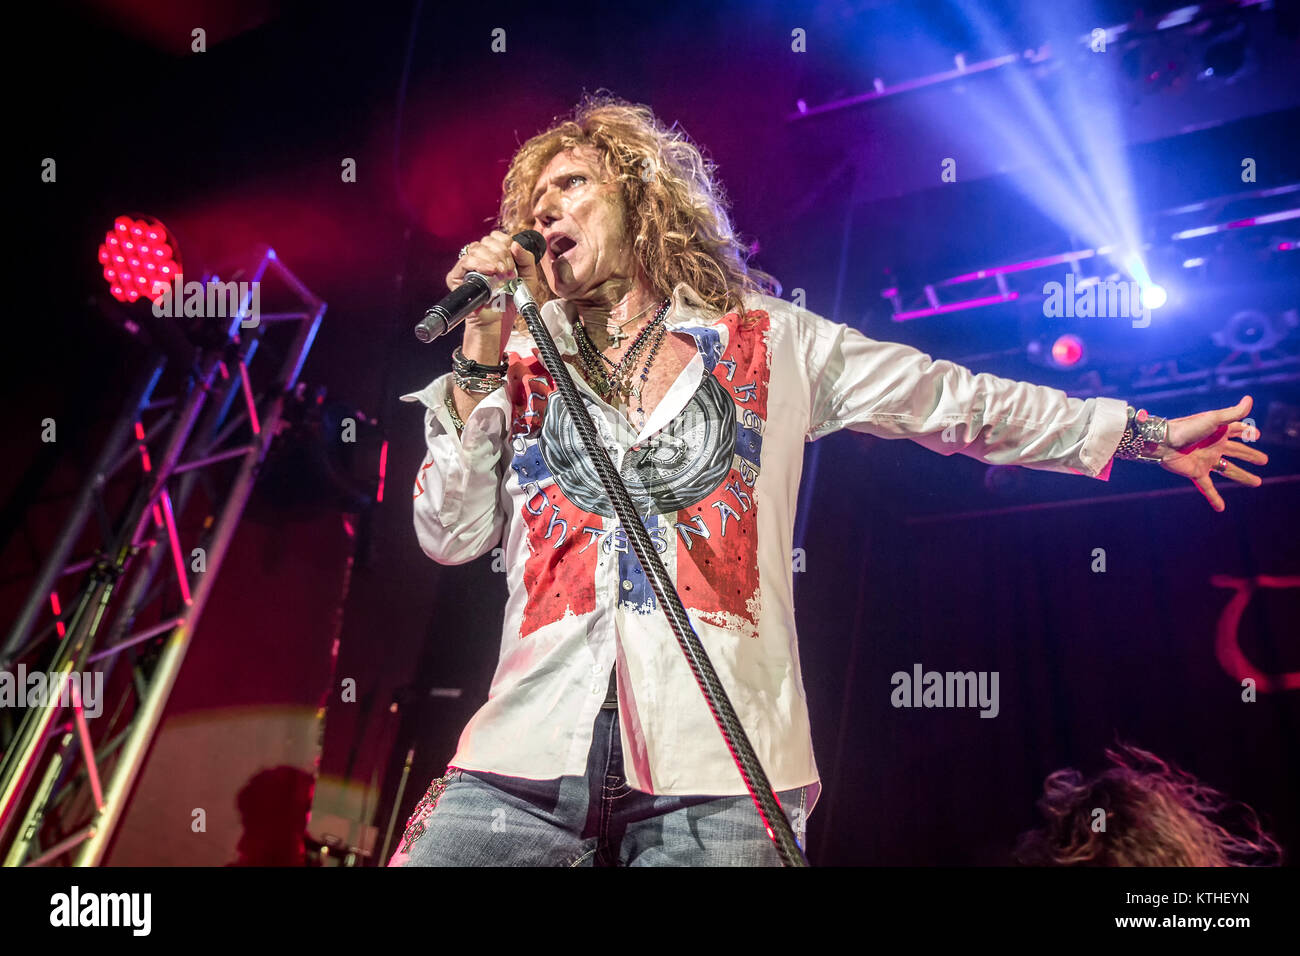 The English rock band Whitesnake performs a live concert at Sentrum Scene in Oslo. Here vocalist David Coverdale is seen live on stage. Norway, 26/07 2016. Stock Photo